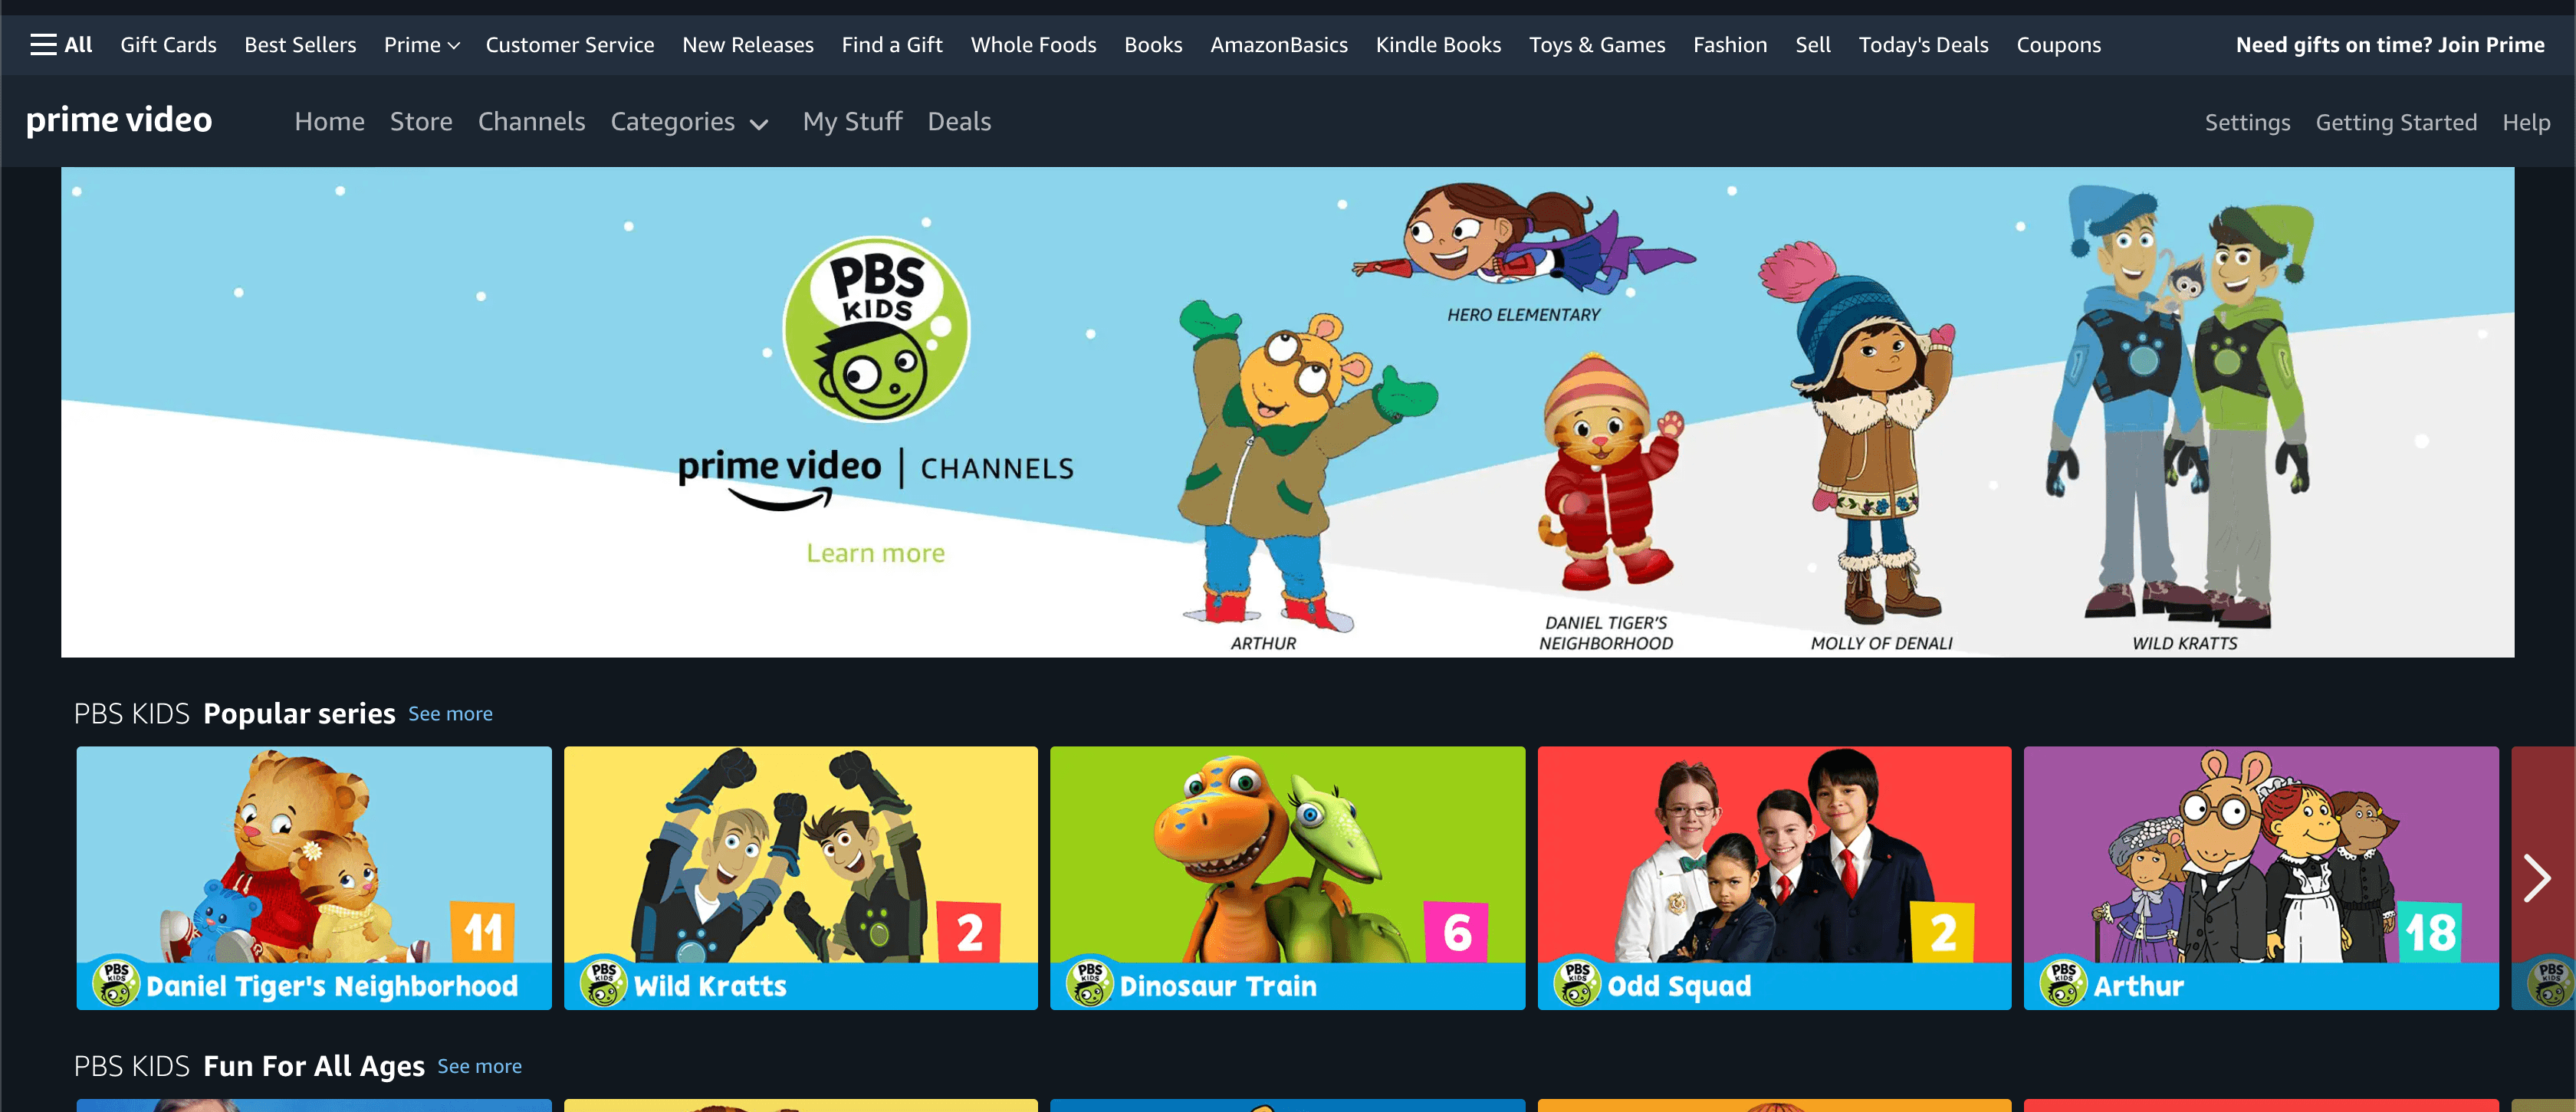 Get One Month of PBS Kids Prime Video Channel for 99 Cents (Limited Time Offer)